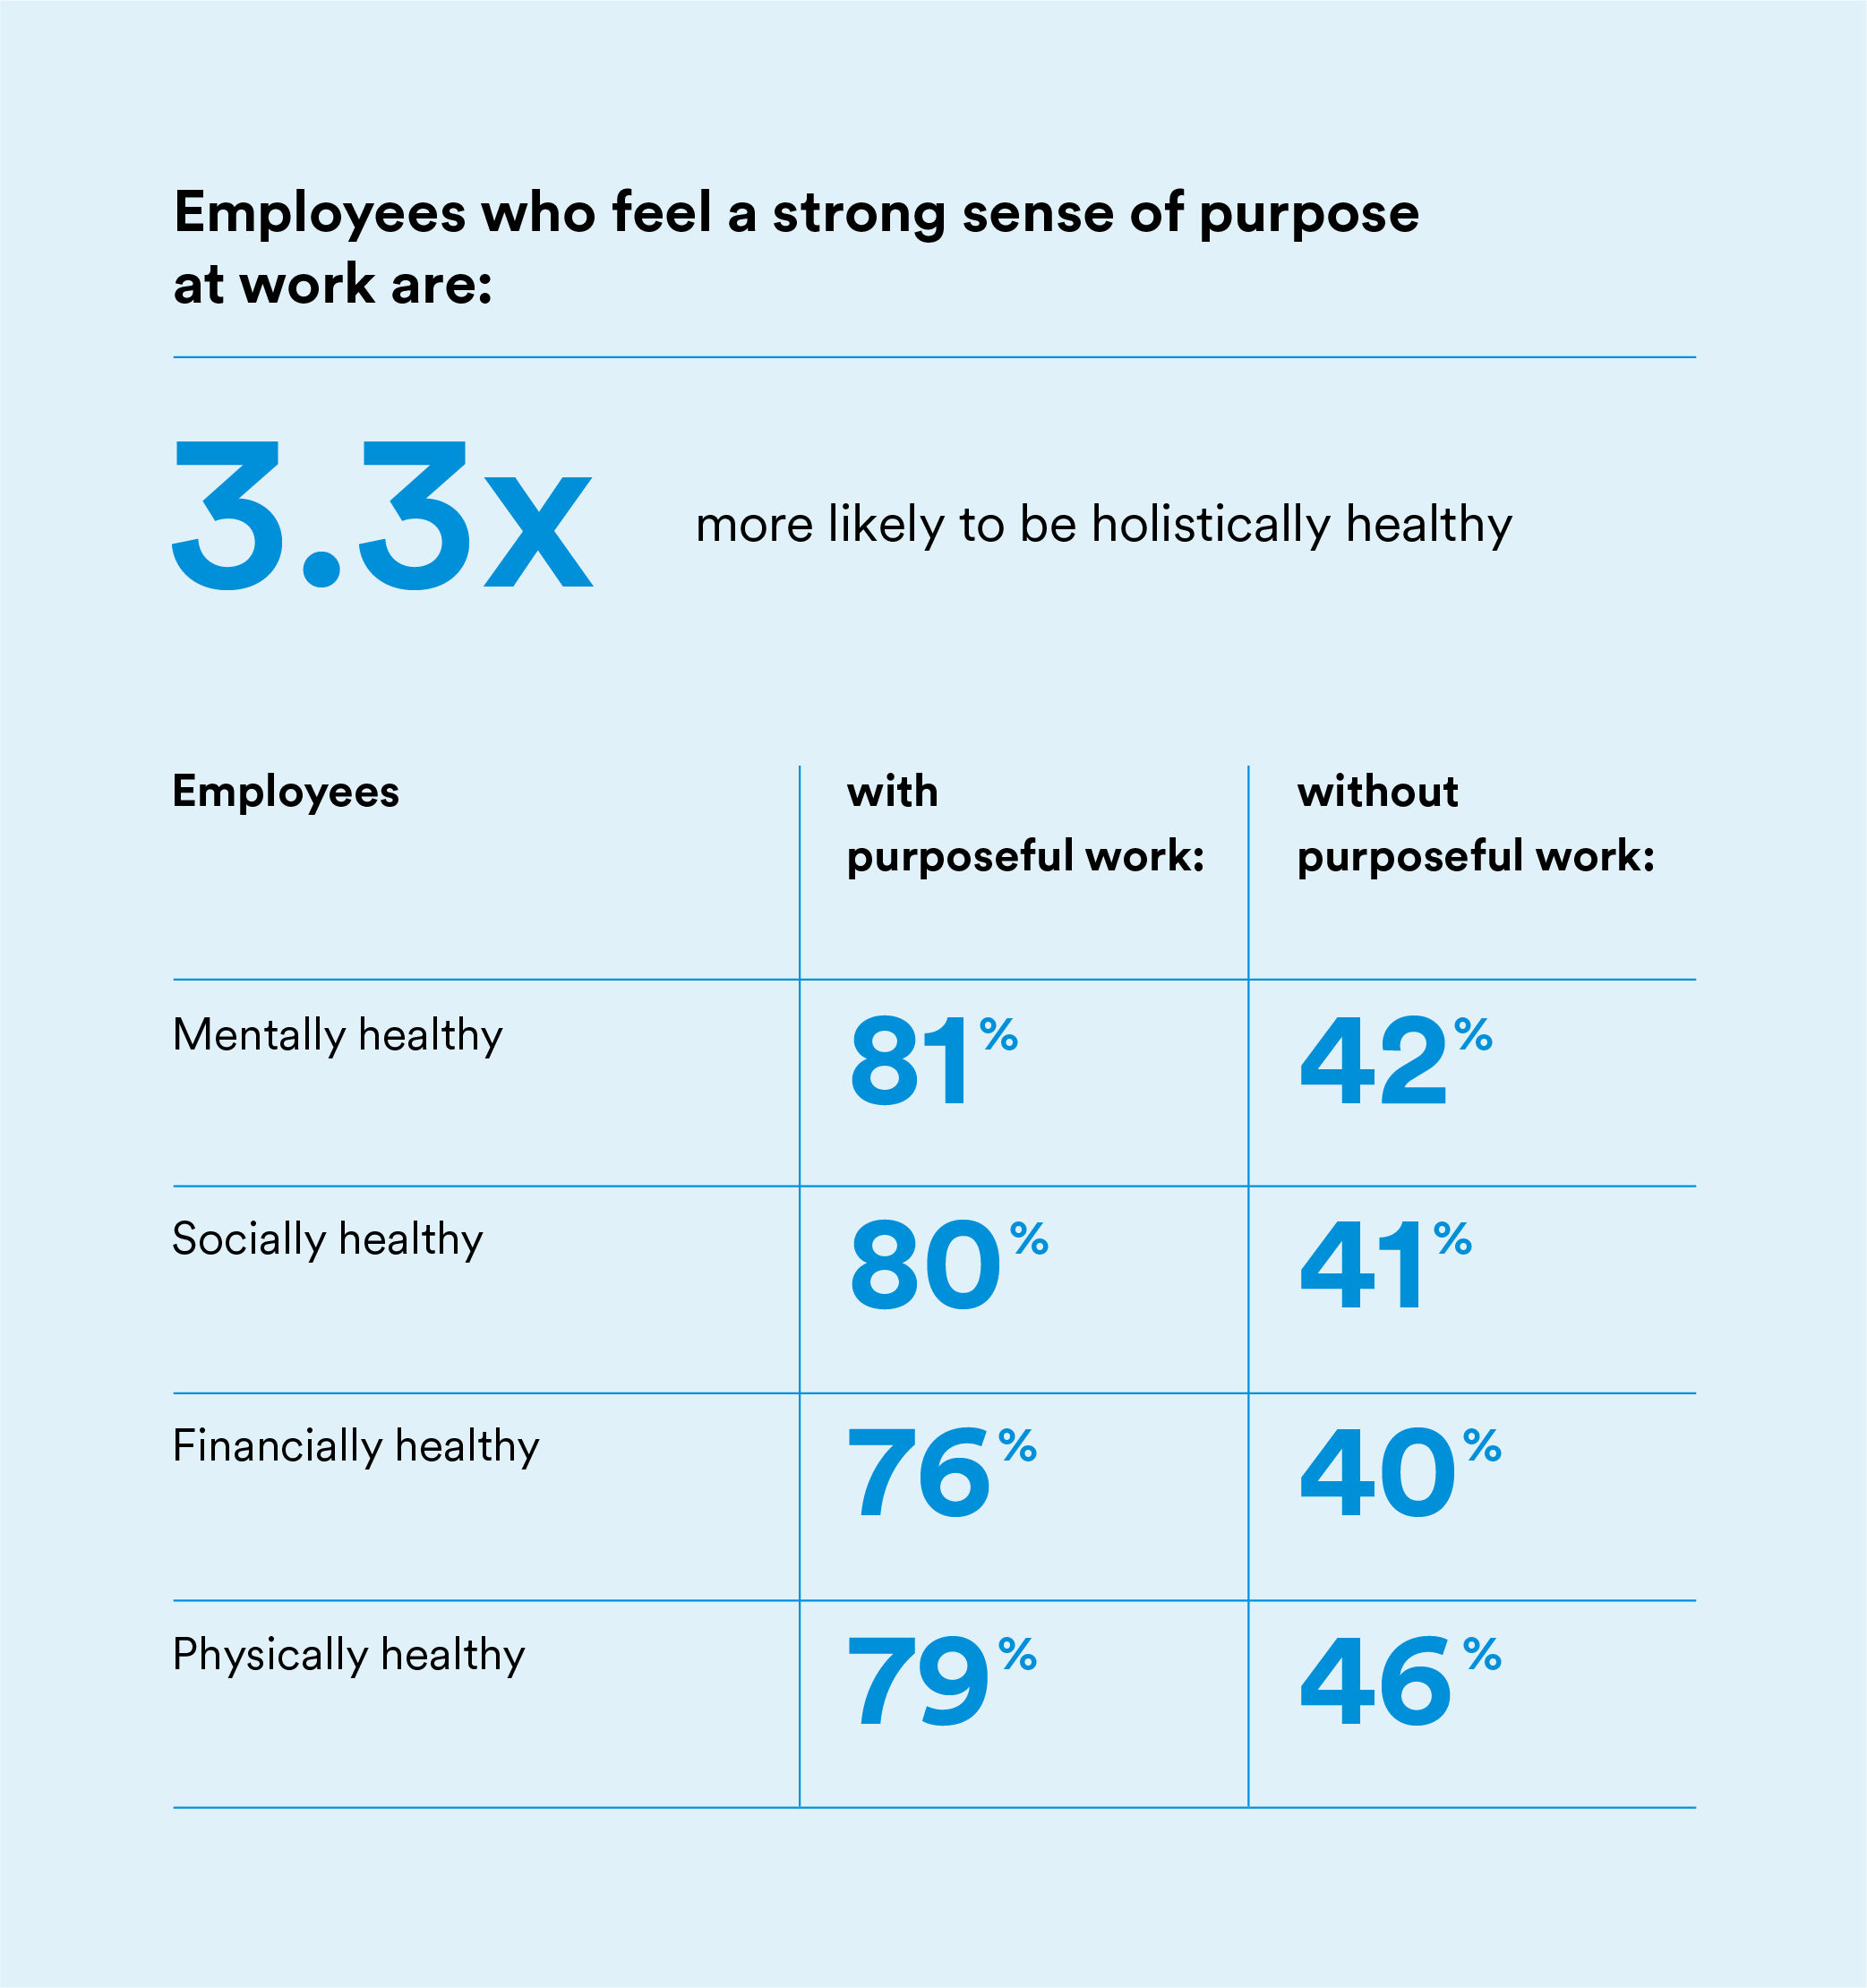 Employees who feel a strong sense of purpose at work are much more likely to be holistically healthy, encompassing mental, social, financial and physical health.